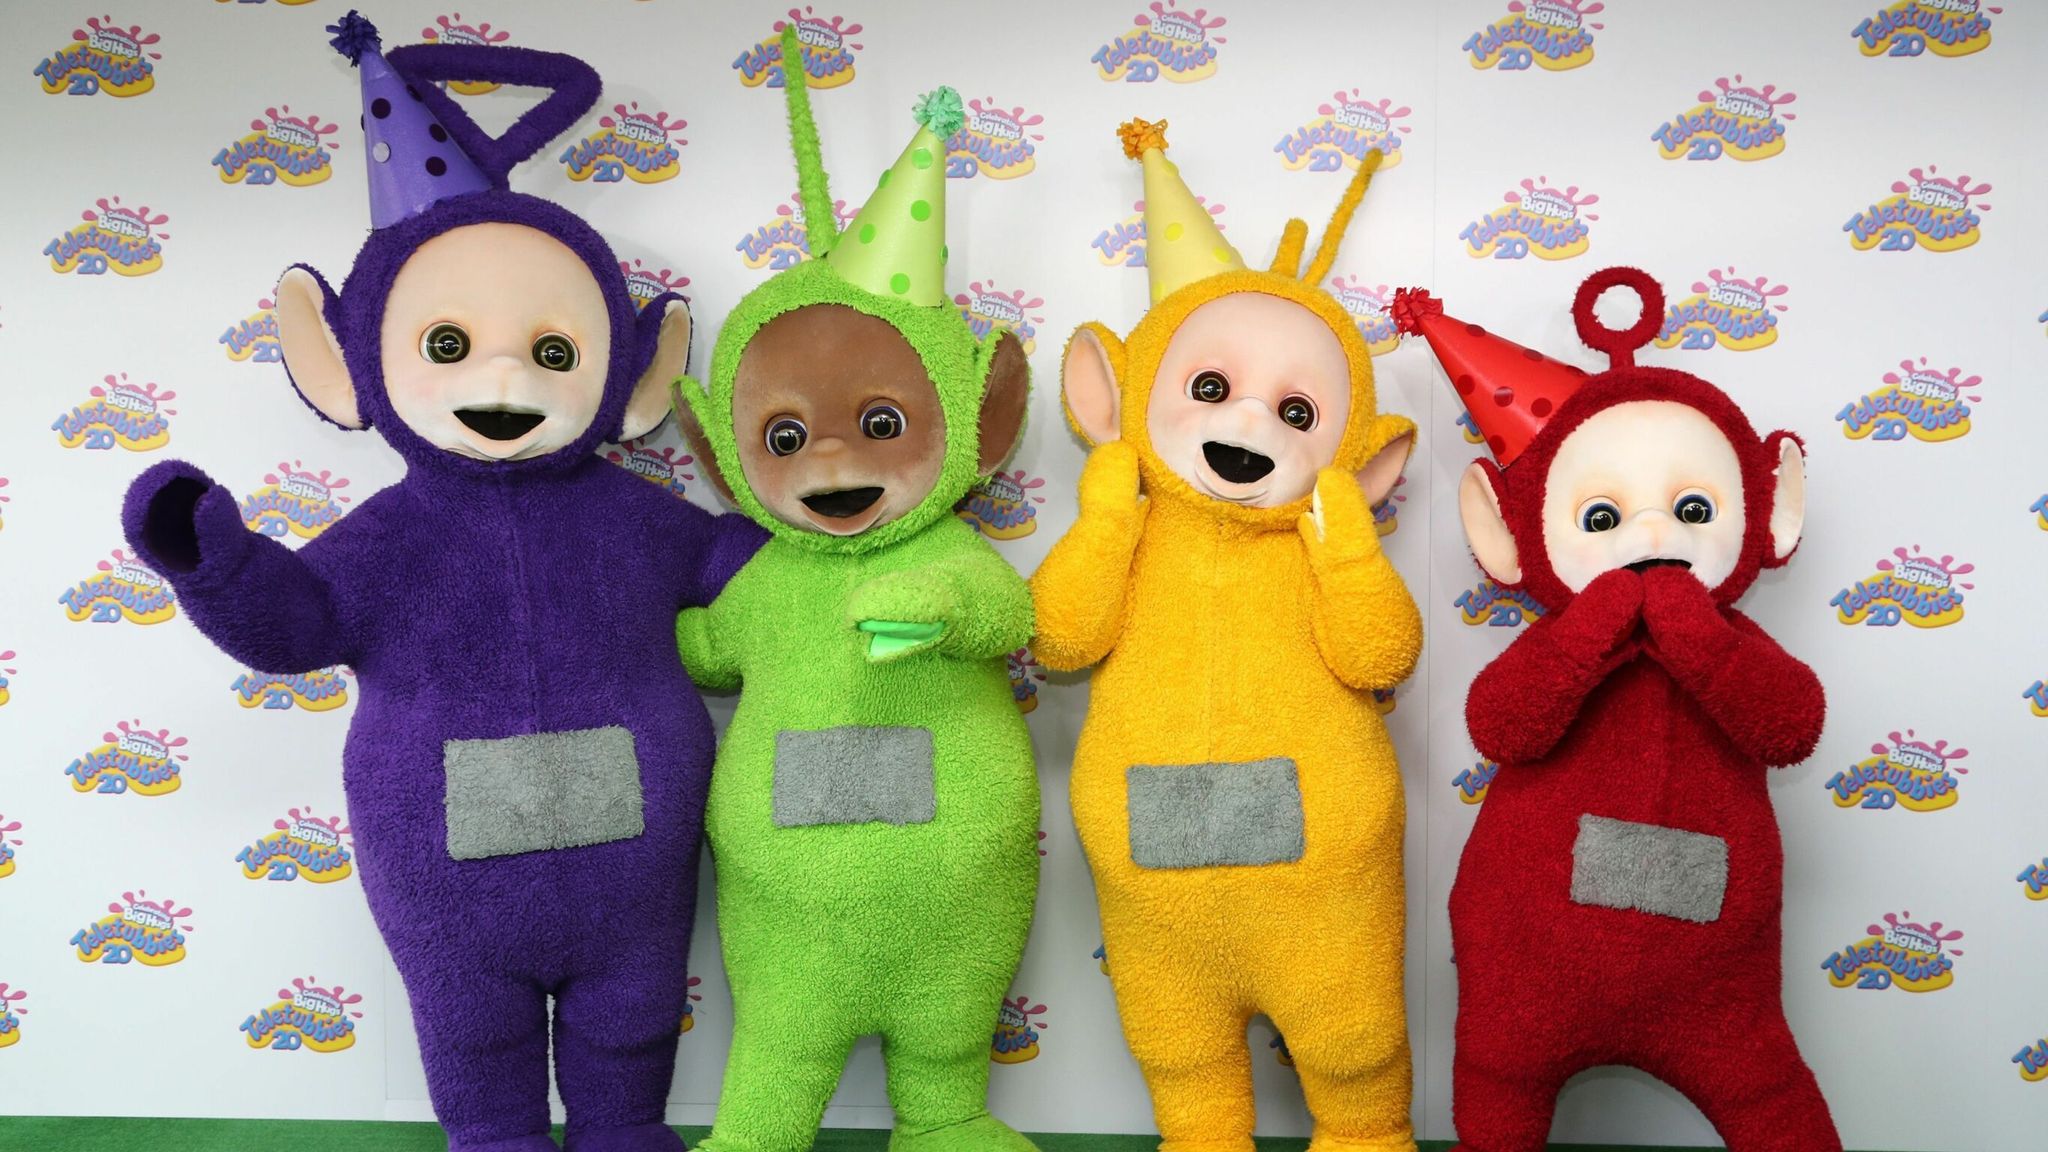 Teletubbies go head-to-head with Coldplay as they release 25th